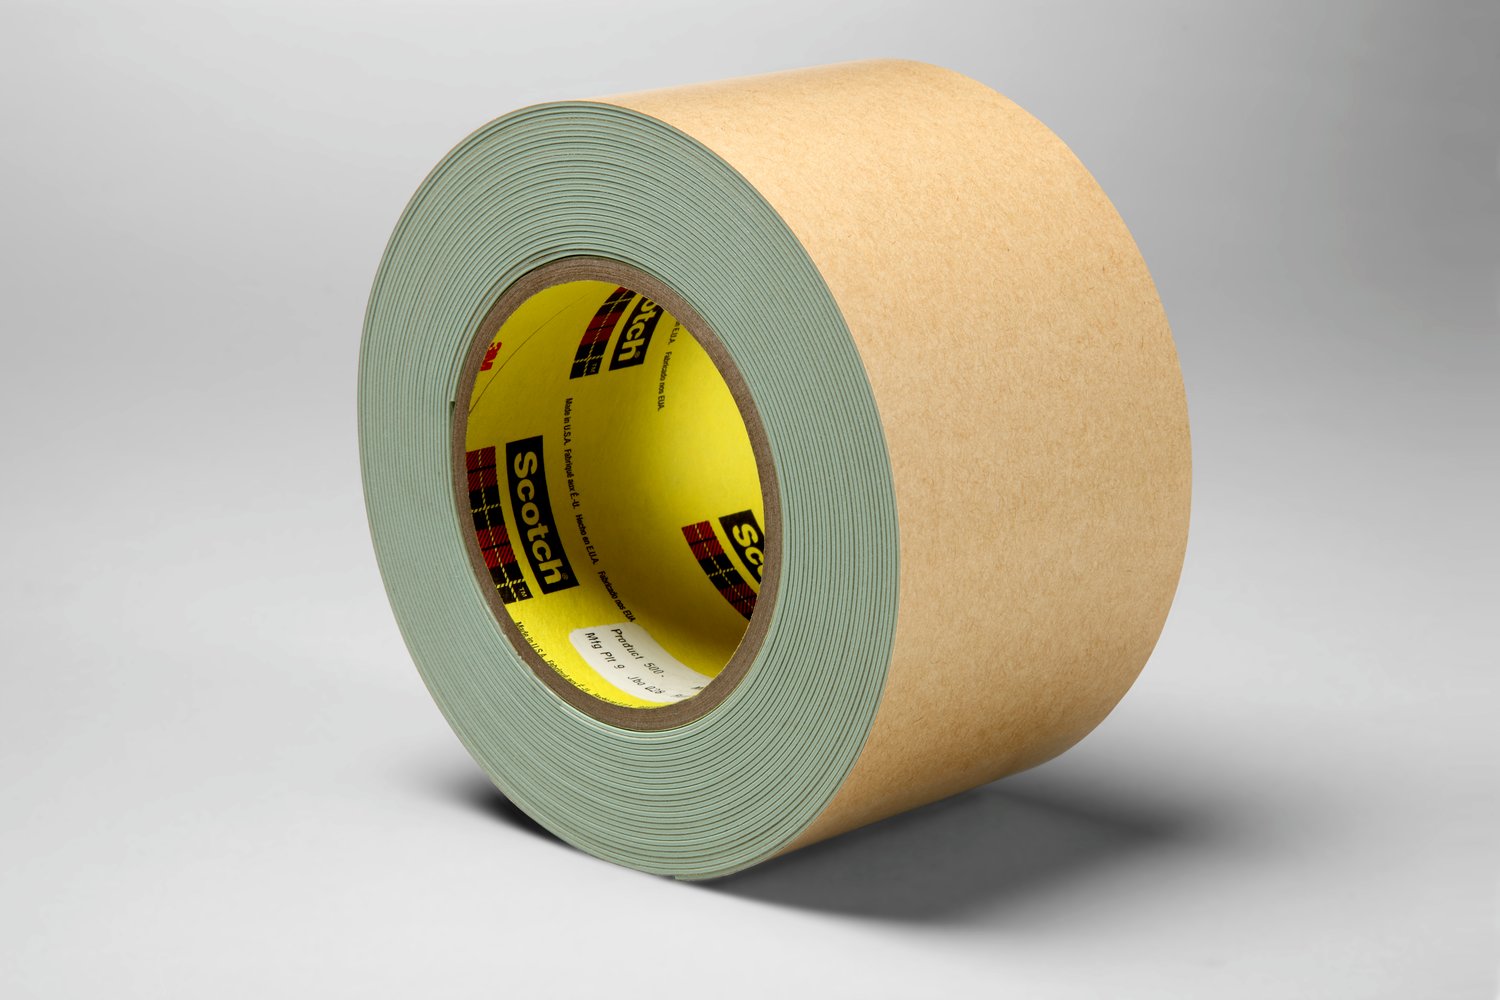 7000048741 - 3M Impact Stripping Tape 500, Green, 30 in x 10 yd, 36 mil, 1 roll per
case